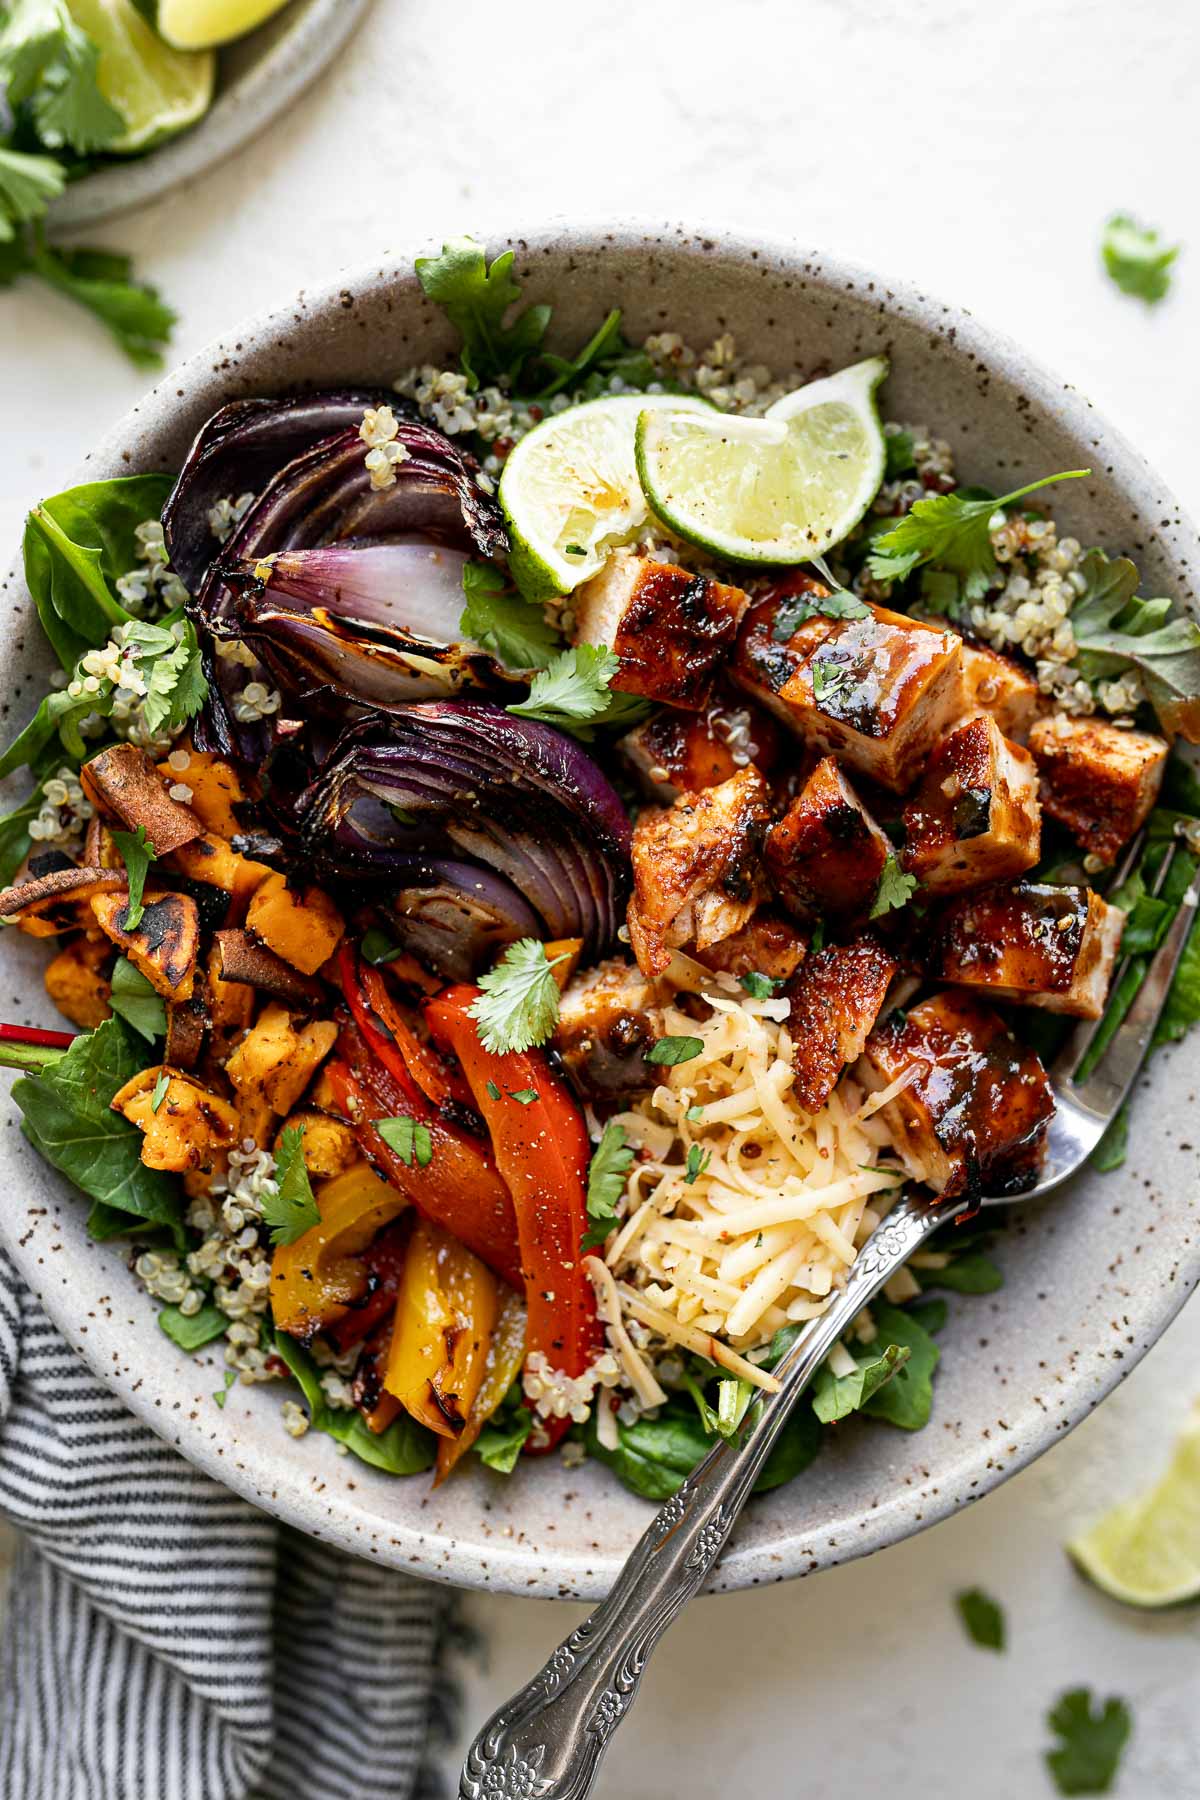 Grilled BBQ chicken bowl with diced BBQ chicken, grilled onions, sweet potatoes & bell peppers sitting atop a bed of greens & quinoa in a large speckled gray bowl. The bowl sits atop a white surface, surrounded by a striped gray linen napkin, cilantro leaves & lime wedges.